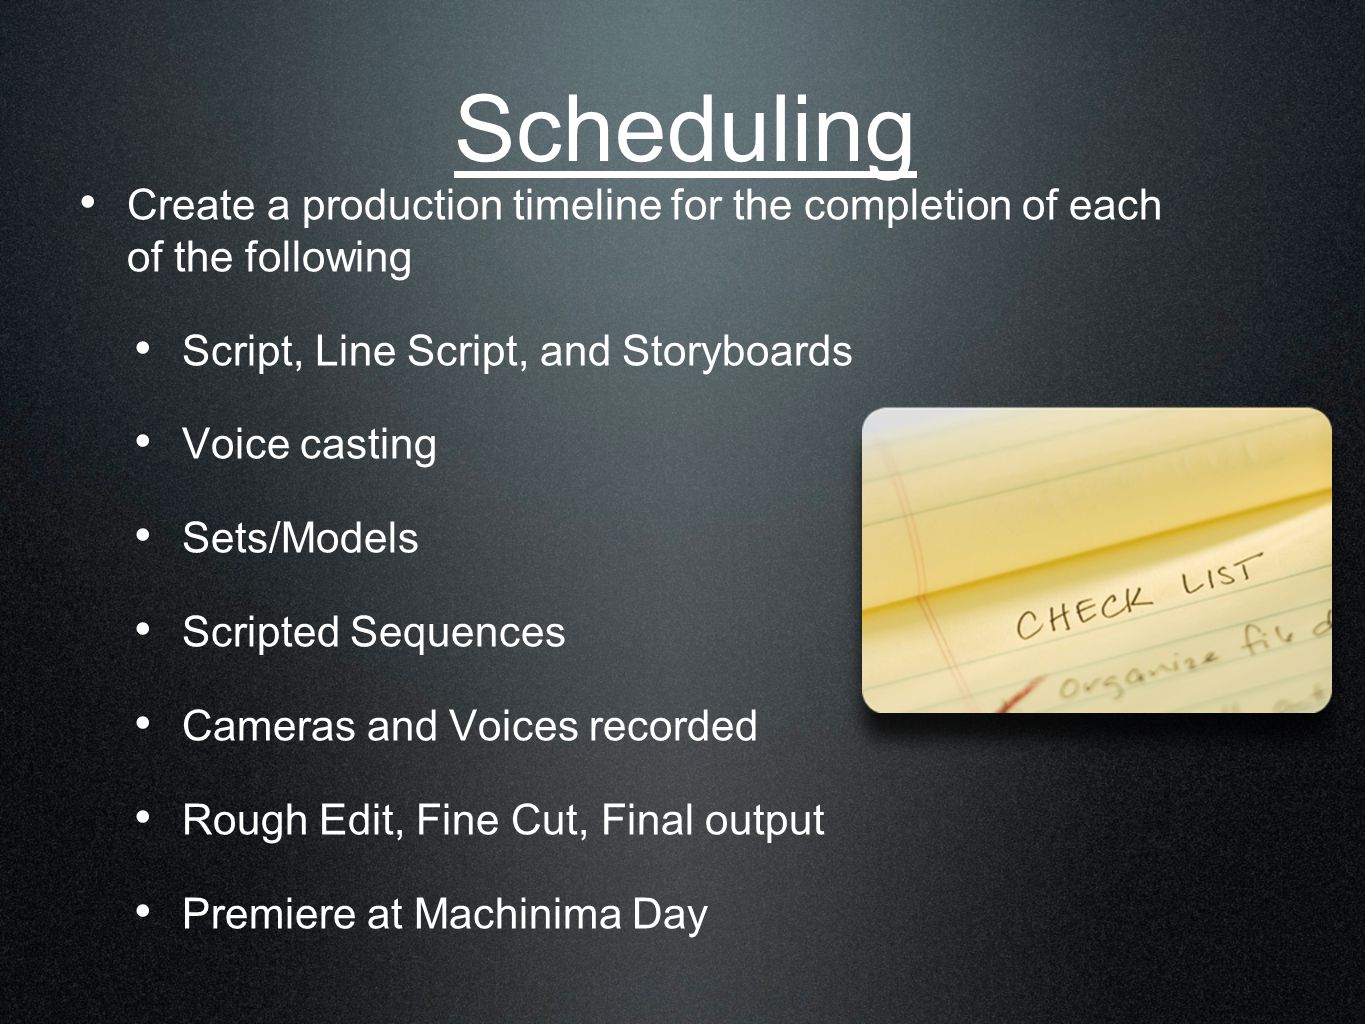 Scheduling Create a production timeline for the completion of each of the following Script, Line Script, and Storyboards Voice casting Sets/Models Scripted Sequences Cameras and Voices recorded Rough Edit, Fine Cut, Final output Premiere at Machinima Day